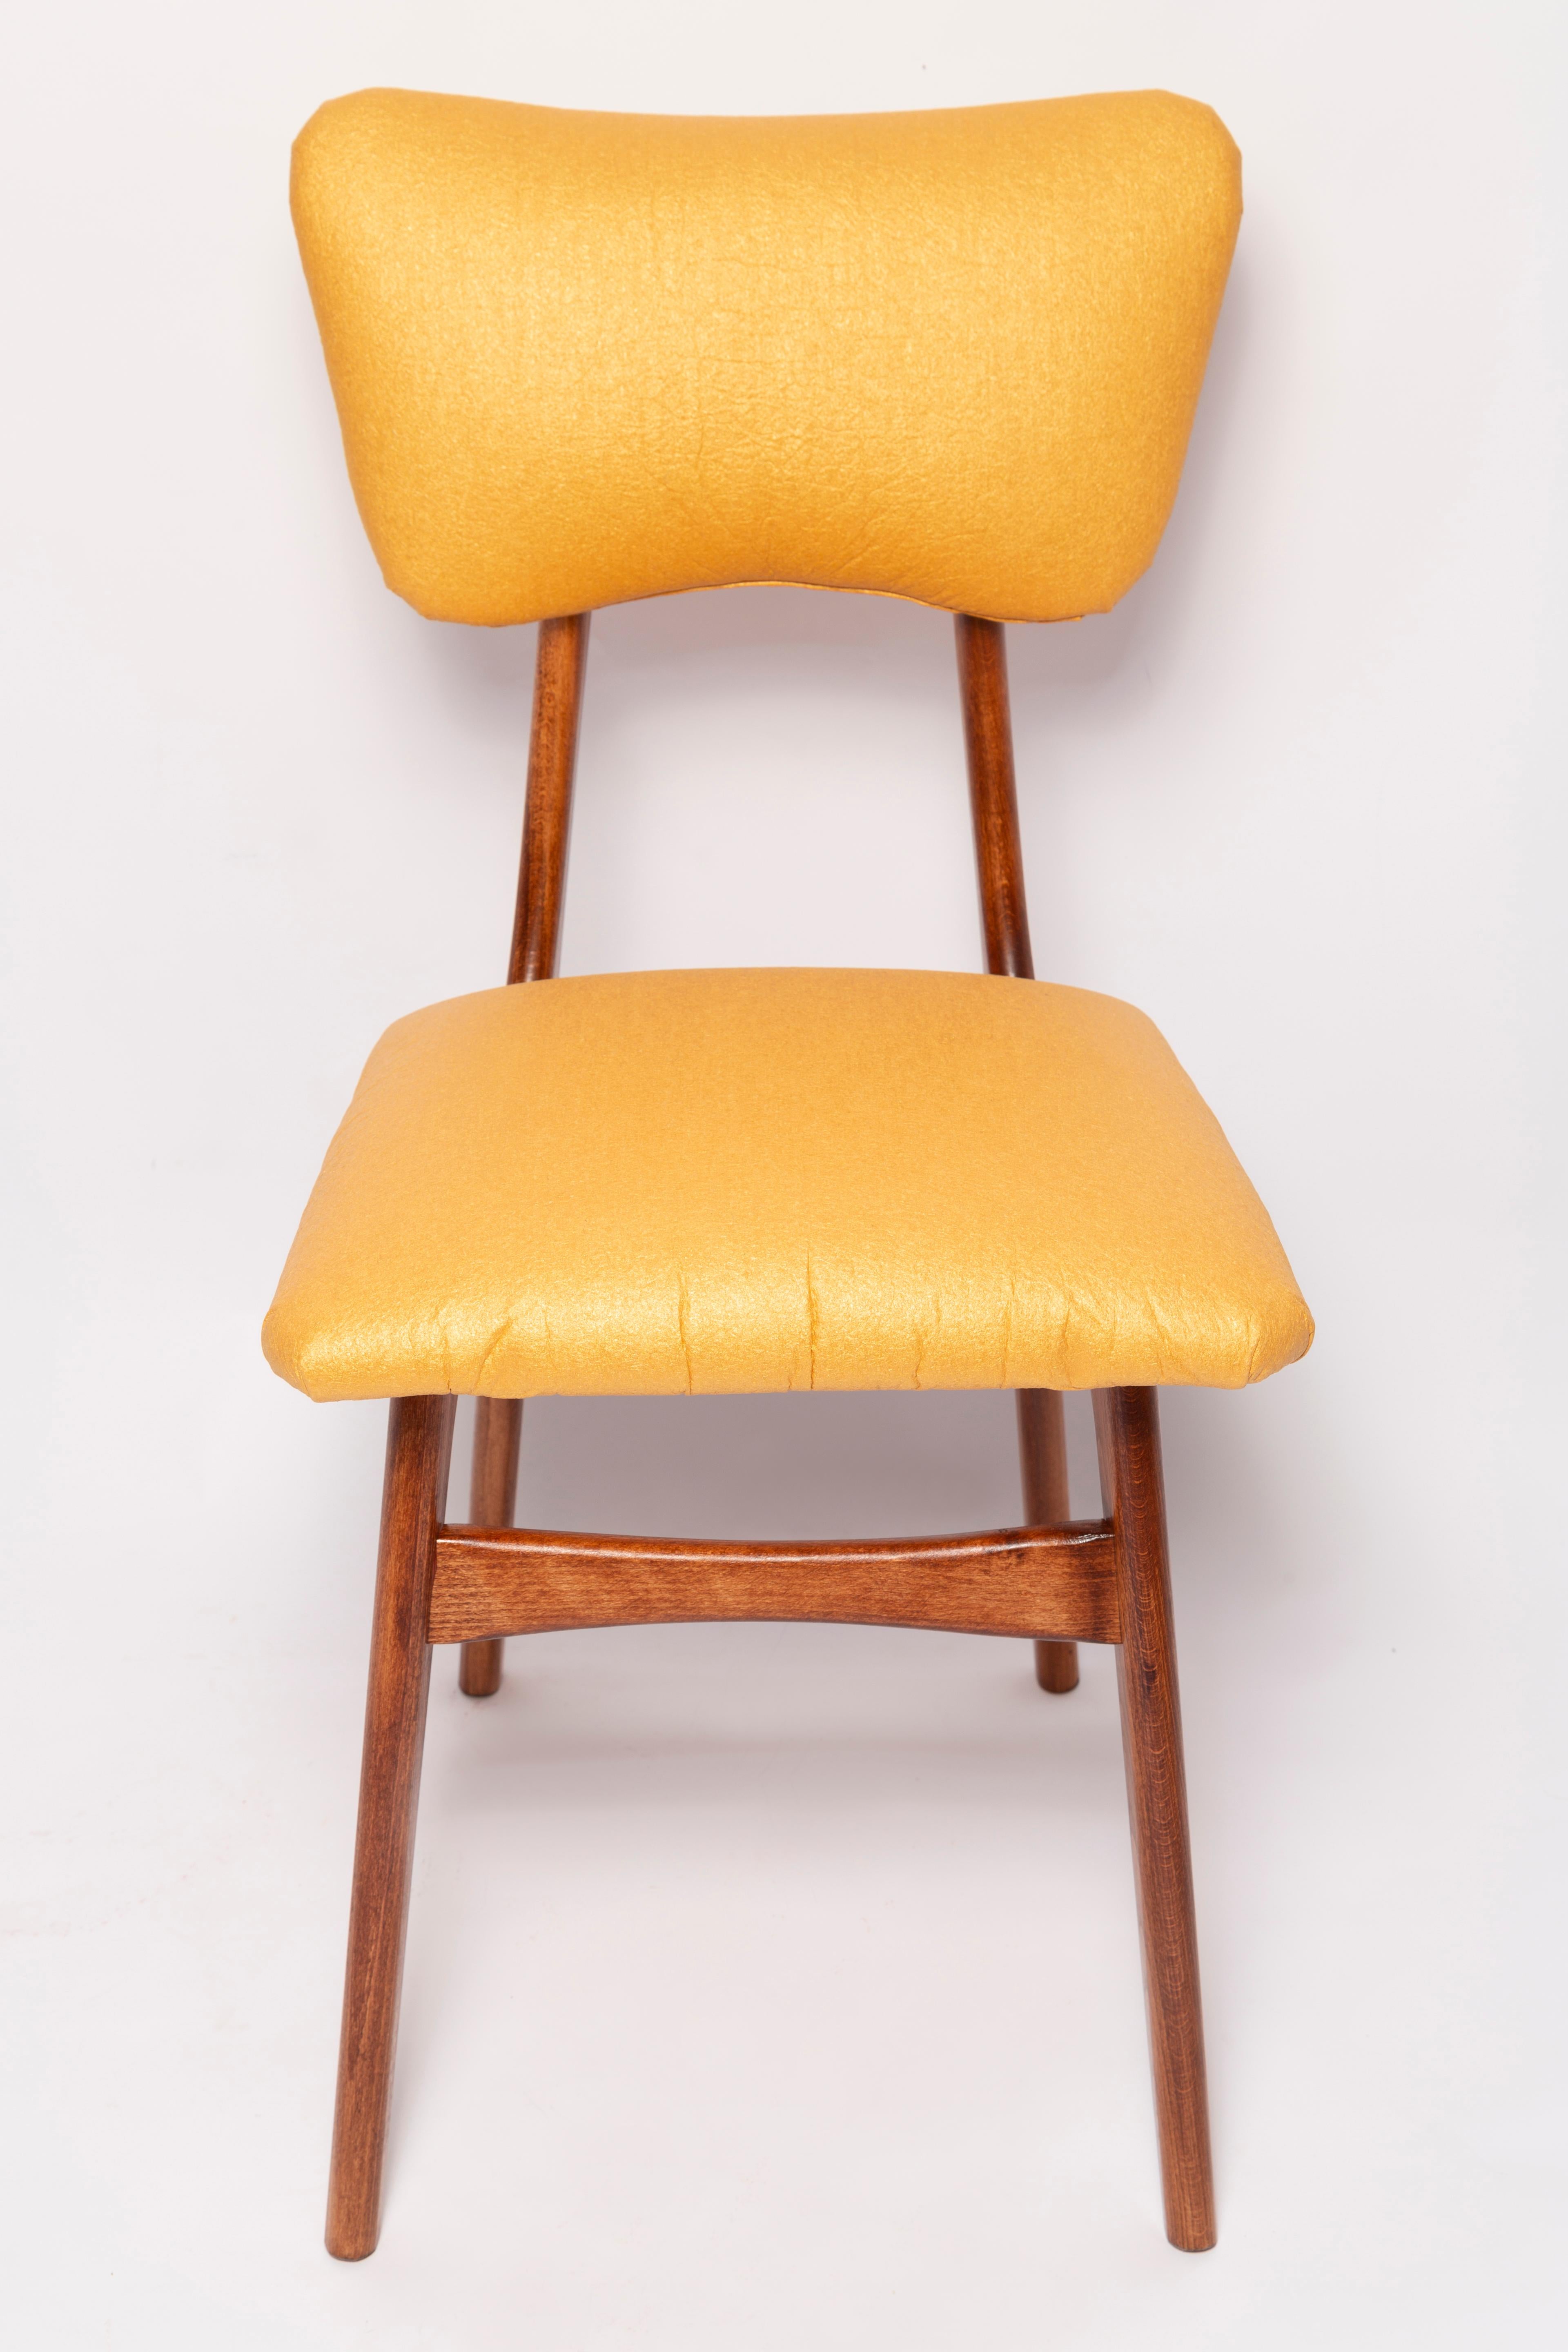 Mid-Century Modern Mid Century Butterfly Dining Chair, Pineapple Vegan Leather, Europe, 1960s For Sale